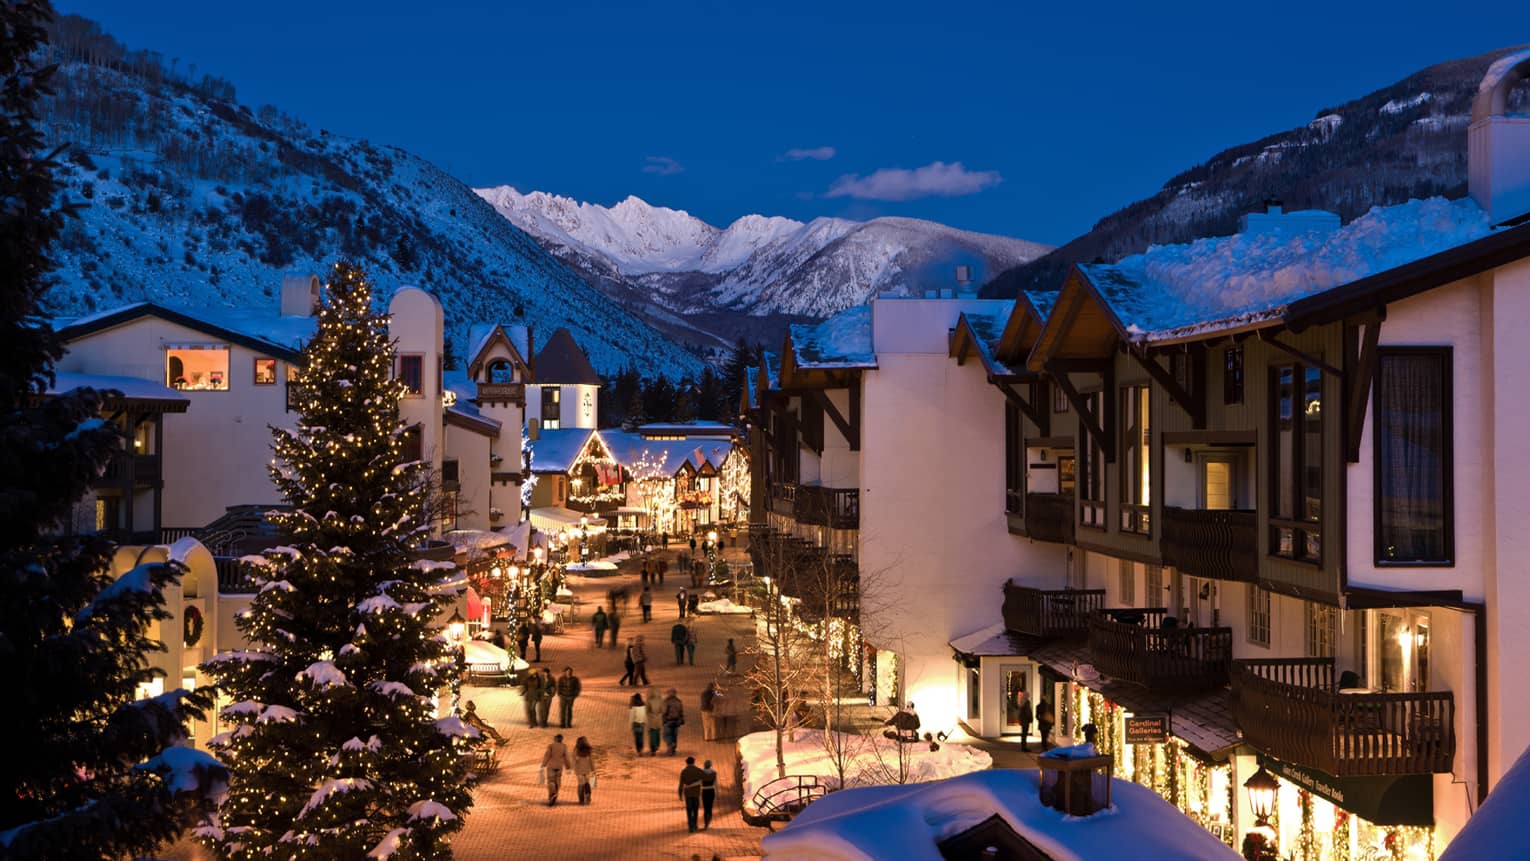 A snow covered hotel property surrounded by mountains and trees with lights coming out of buildings and street lamps at night.